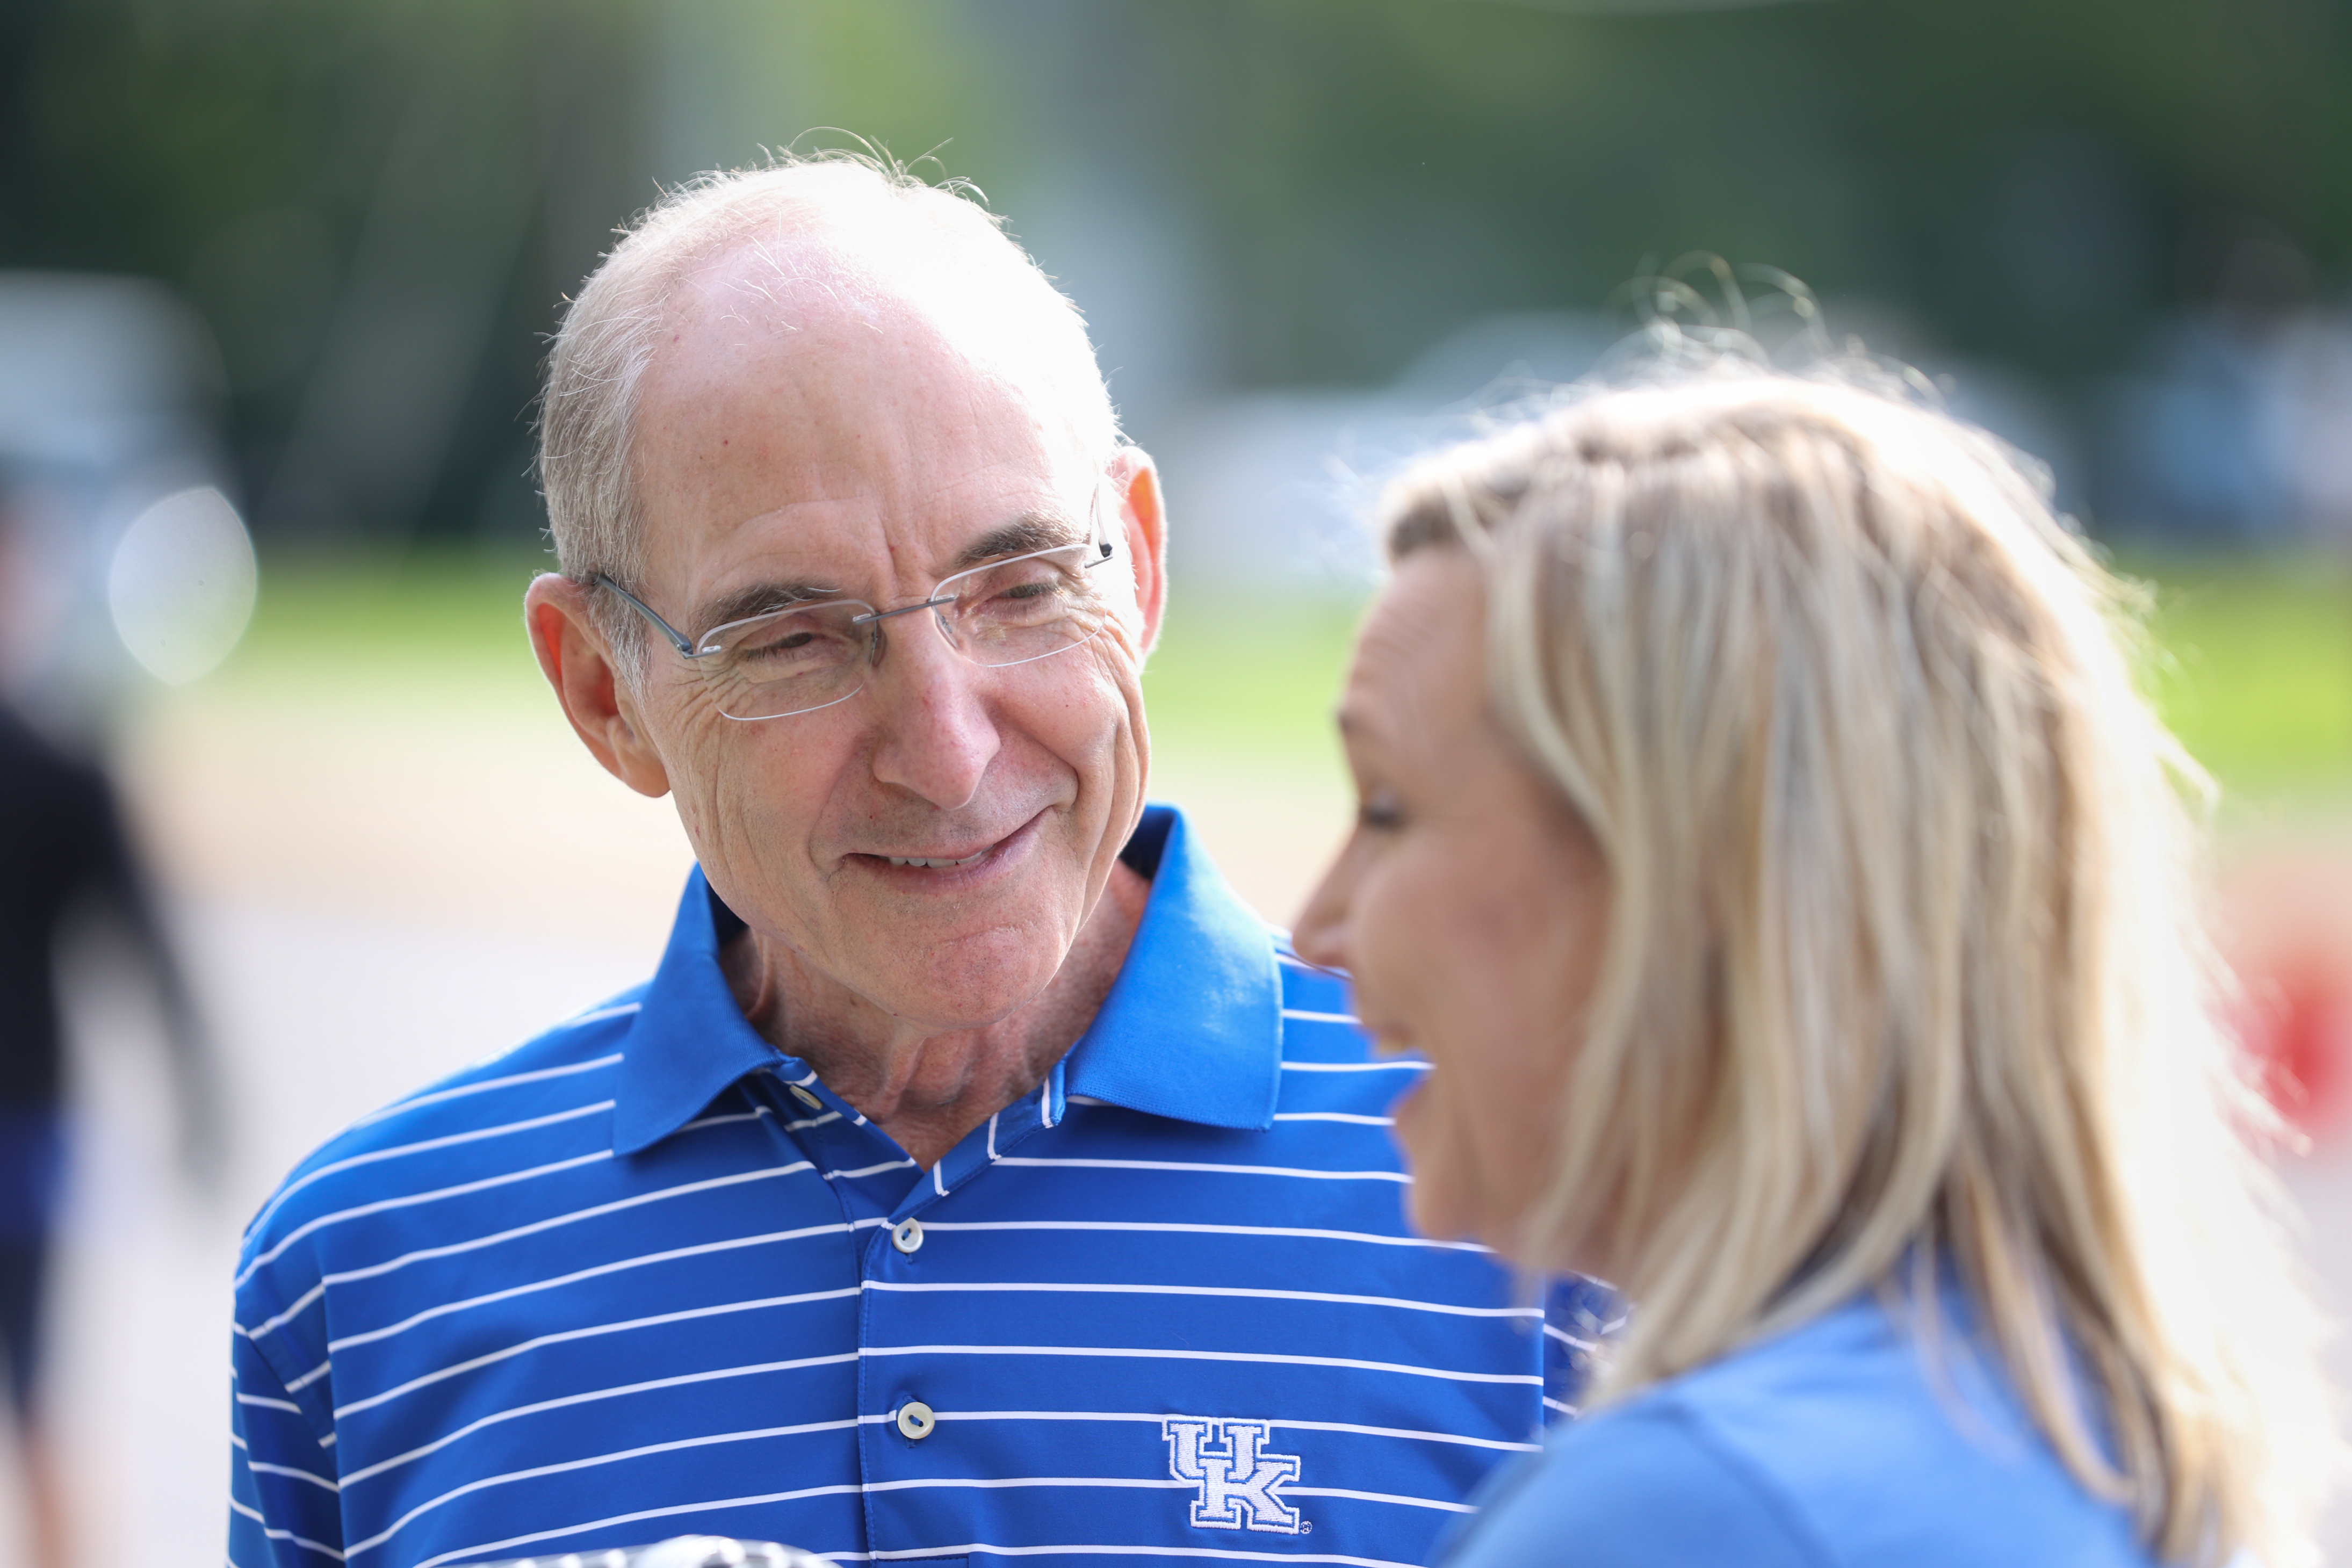 President Capilouto smiling at the 2022 student housing move-in.